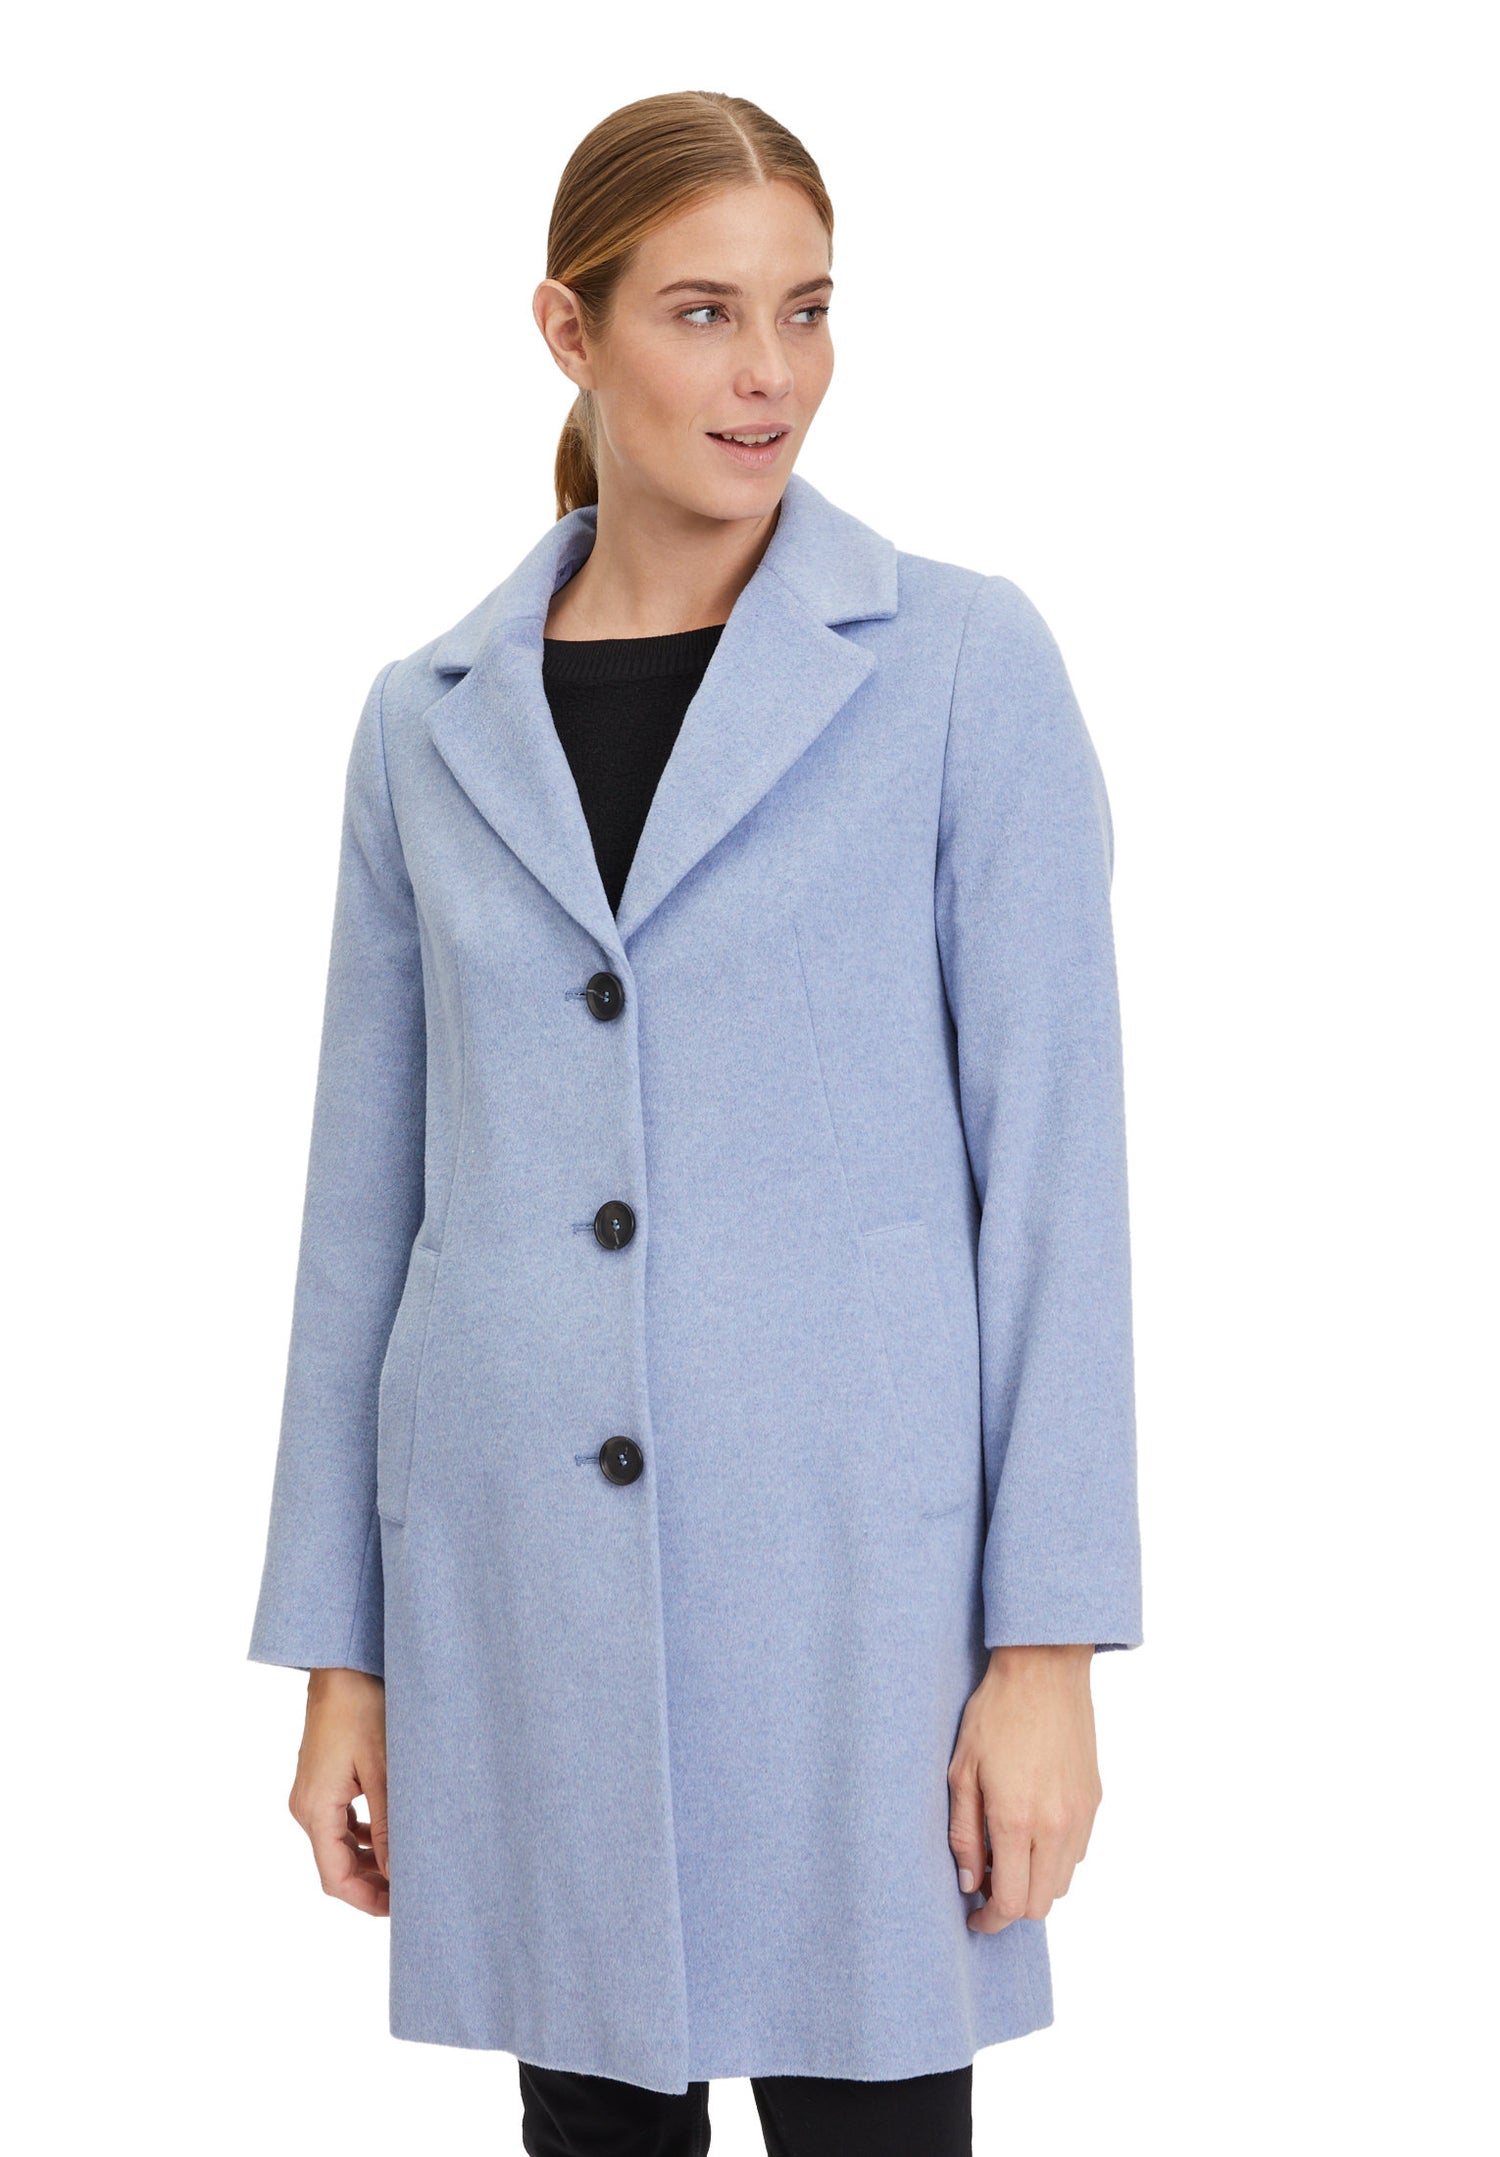 Blue Collared Button Up Coat_7578-2146_8002_03